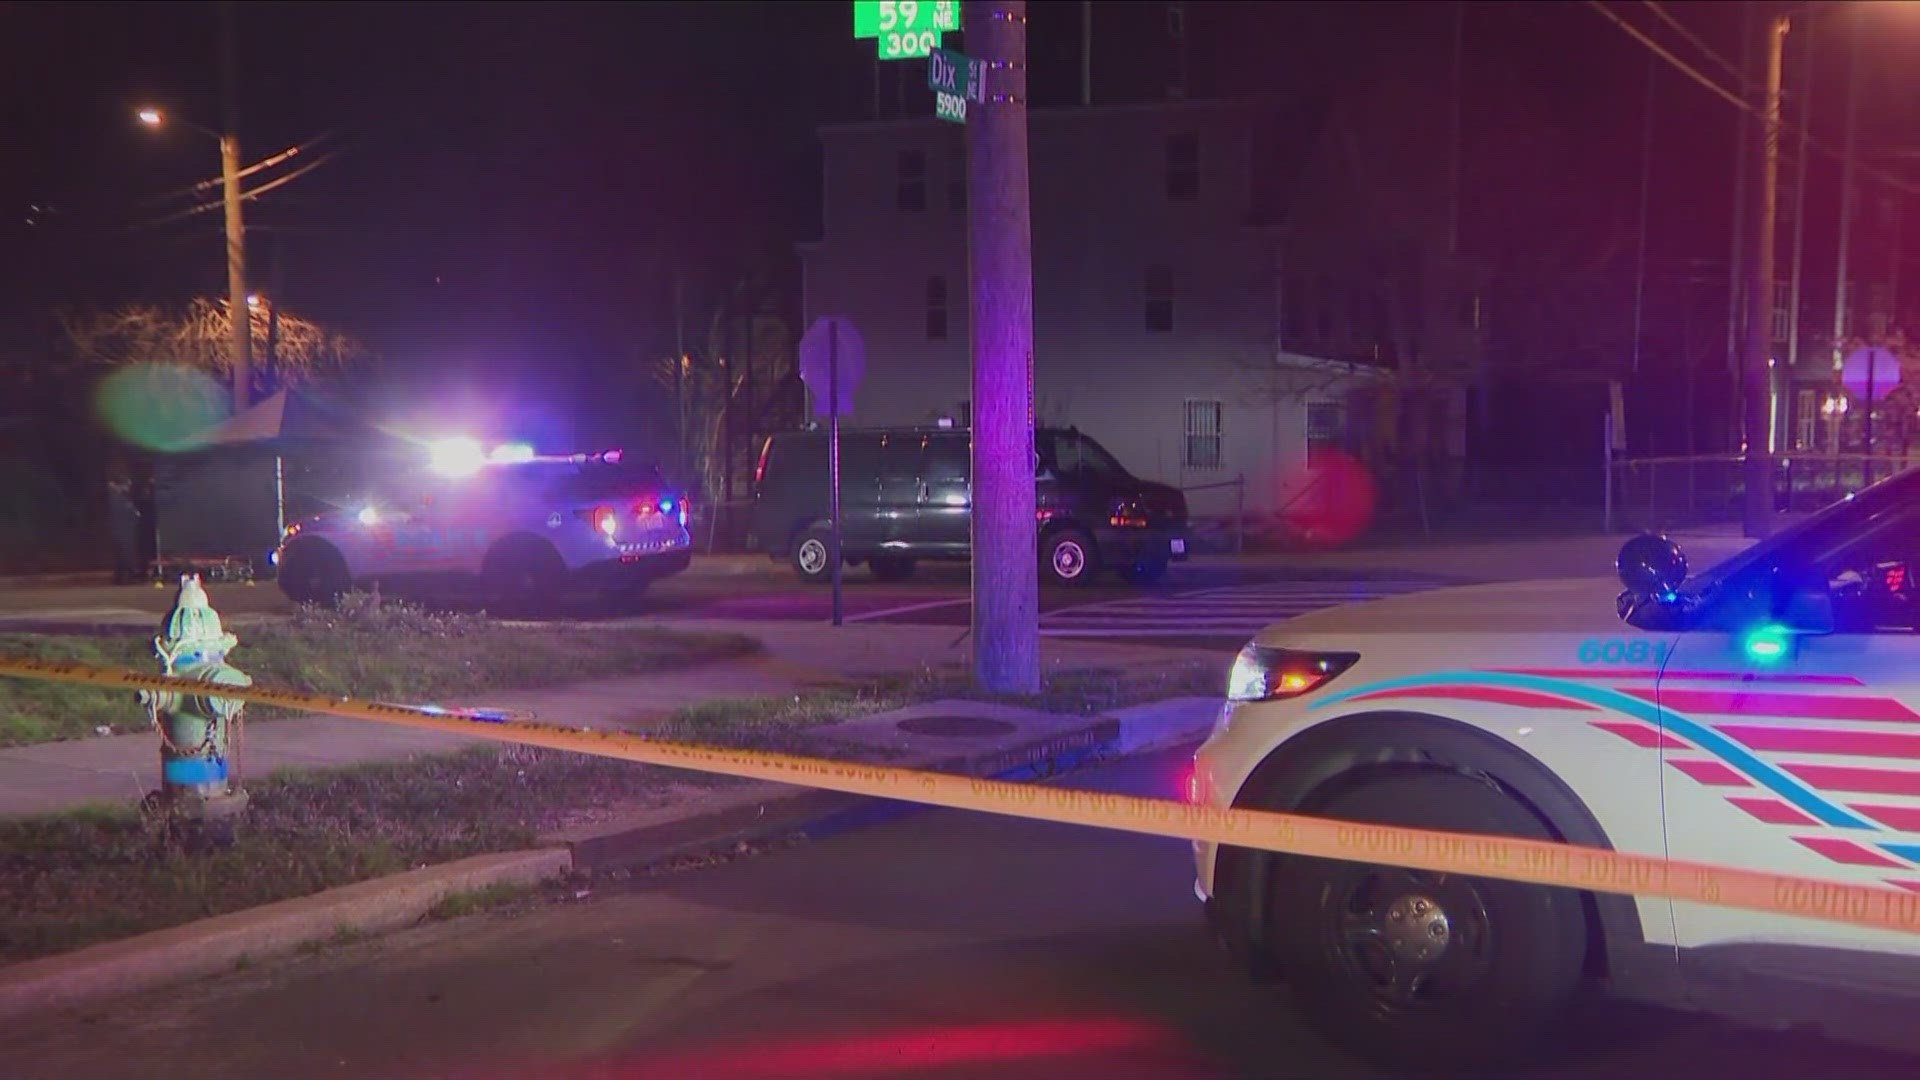 The Dix Street shooting happened just a mile away from where three people were shot Thursday night.